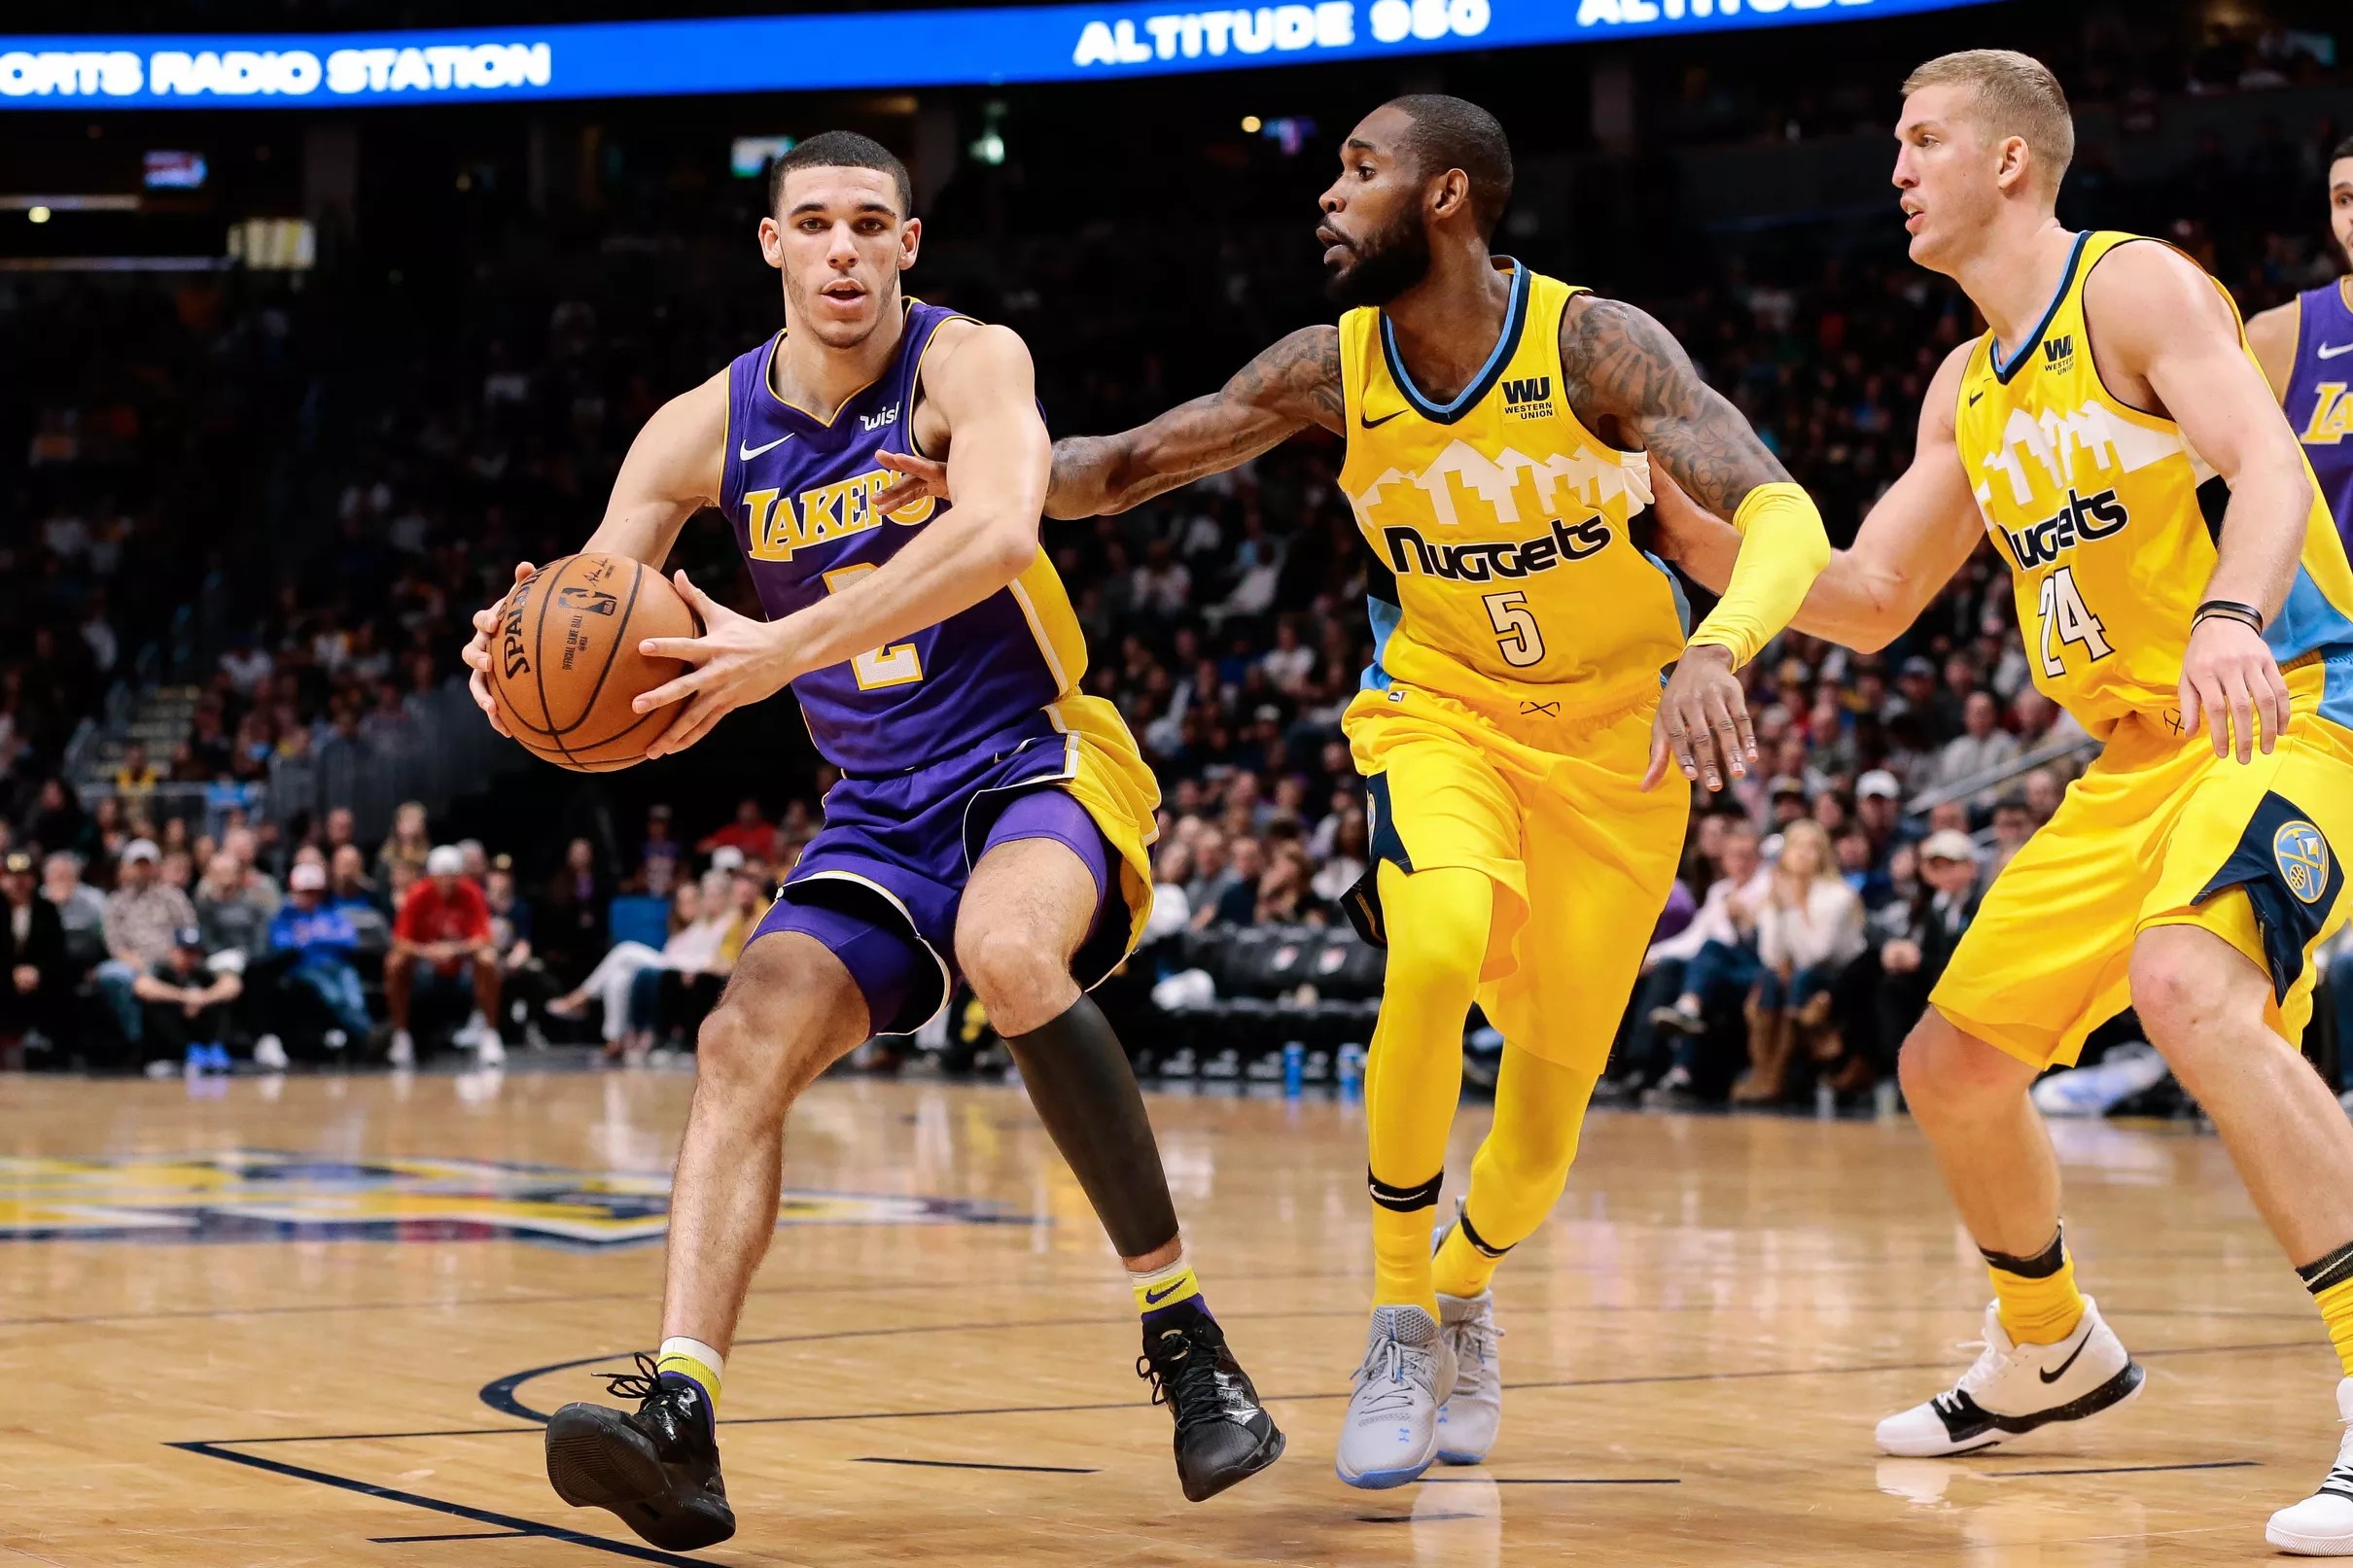 Lakers vs. Nuggets Game preview, starting time, TV